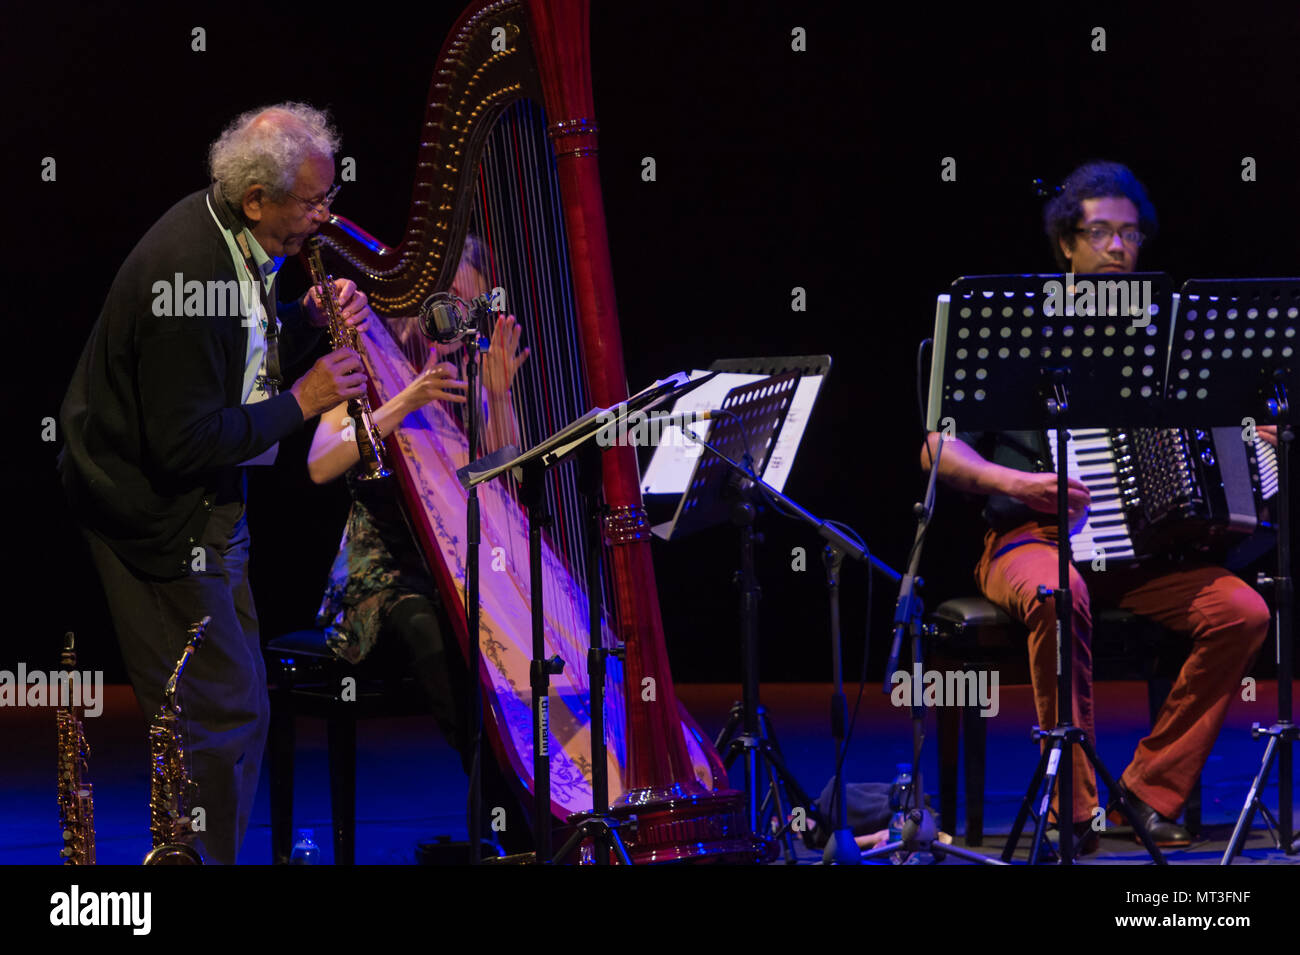 Rome, Italy. 26th May, 2018. Saxophonist and avant-garde composer and one of the fundamental figures of twentieth century music, he performed on 26/5/2018 at the Auditorium Parco della Musica in Rome. With him on stage Taylor Ho Bynum cornet and brass, Adam Matlock accordion, Dan Peck tuba, Jacqueline Kerrod and Miriam Overloch hard. Anthony Braxton, Jacqueline Perrod and Adam Matlock (D) Credit: Leo Claudio De Petris/Pacific Press/Alamy Live News Stock Photo